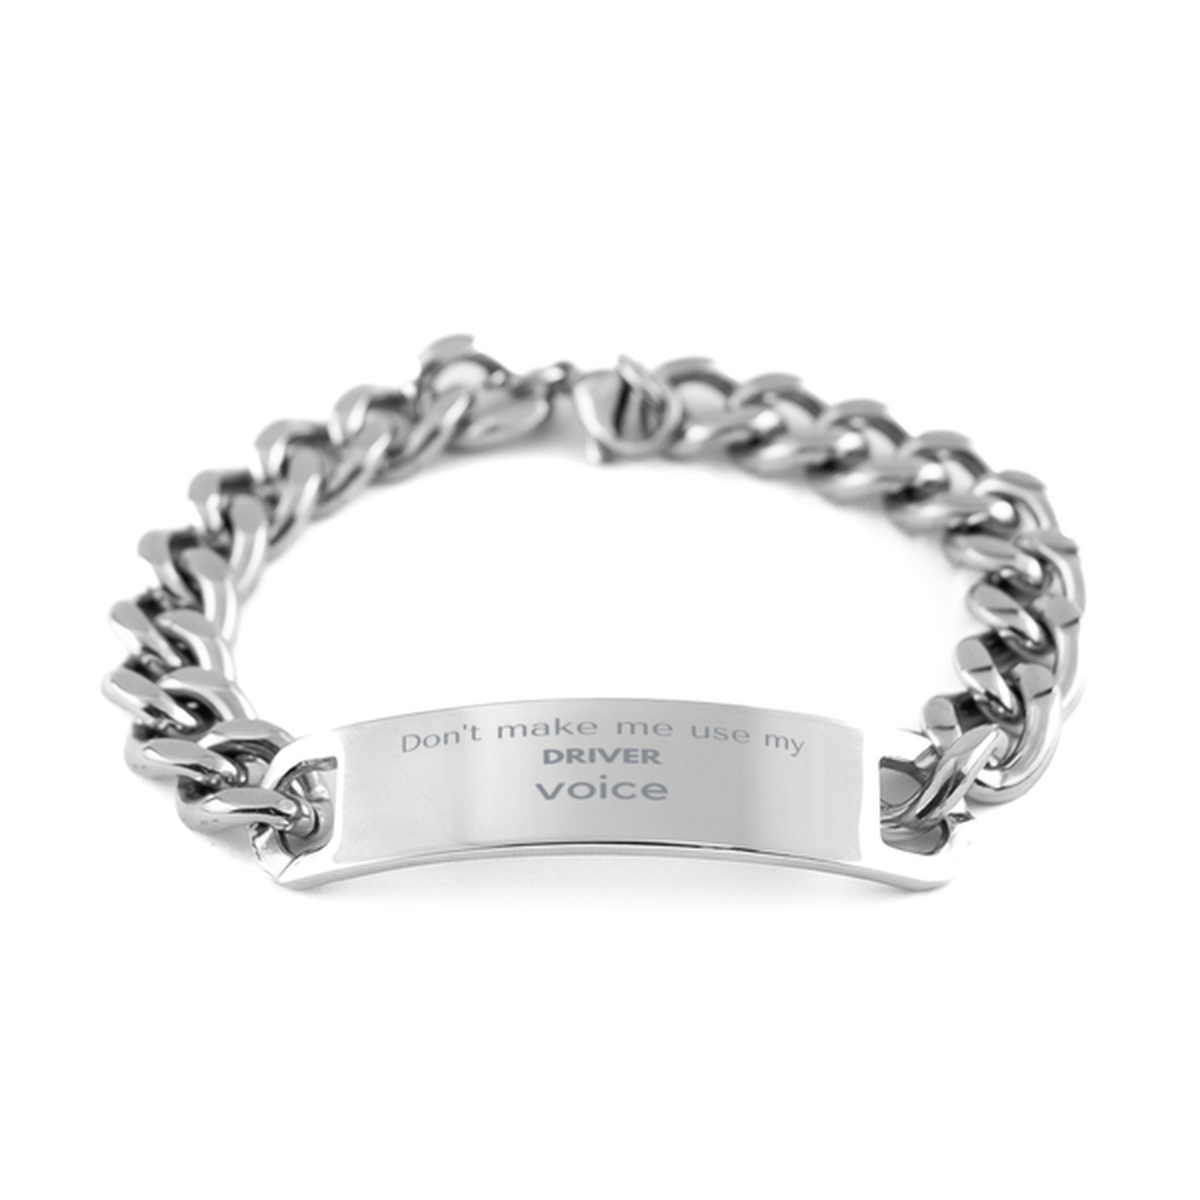 Don't make me use my Driver voice, Sarcasm Driver Gifts, Christmas Driver Cuban Chain Stainless Steel Bracelet Birthday Unique Gifts For Driver Coworkers, Men, Women, Colleague, Friends